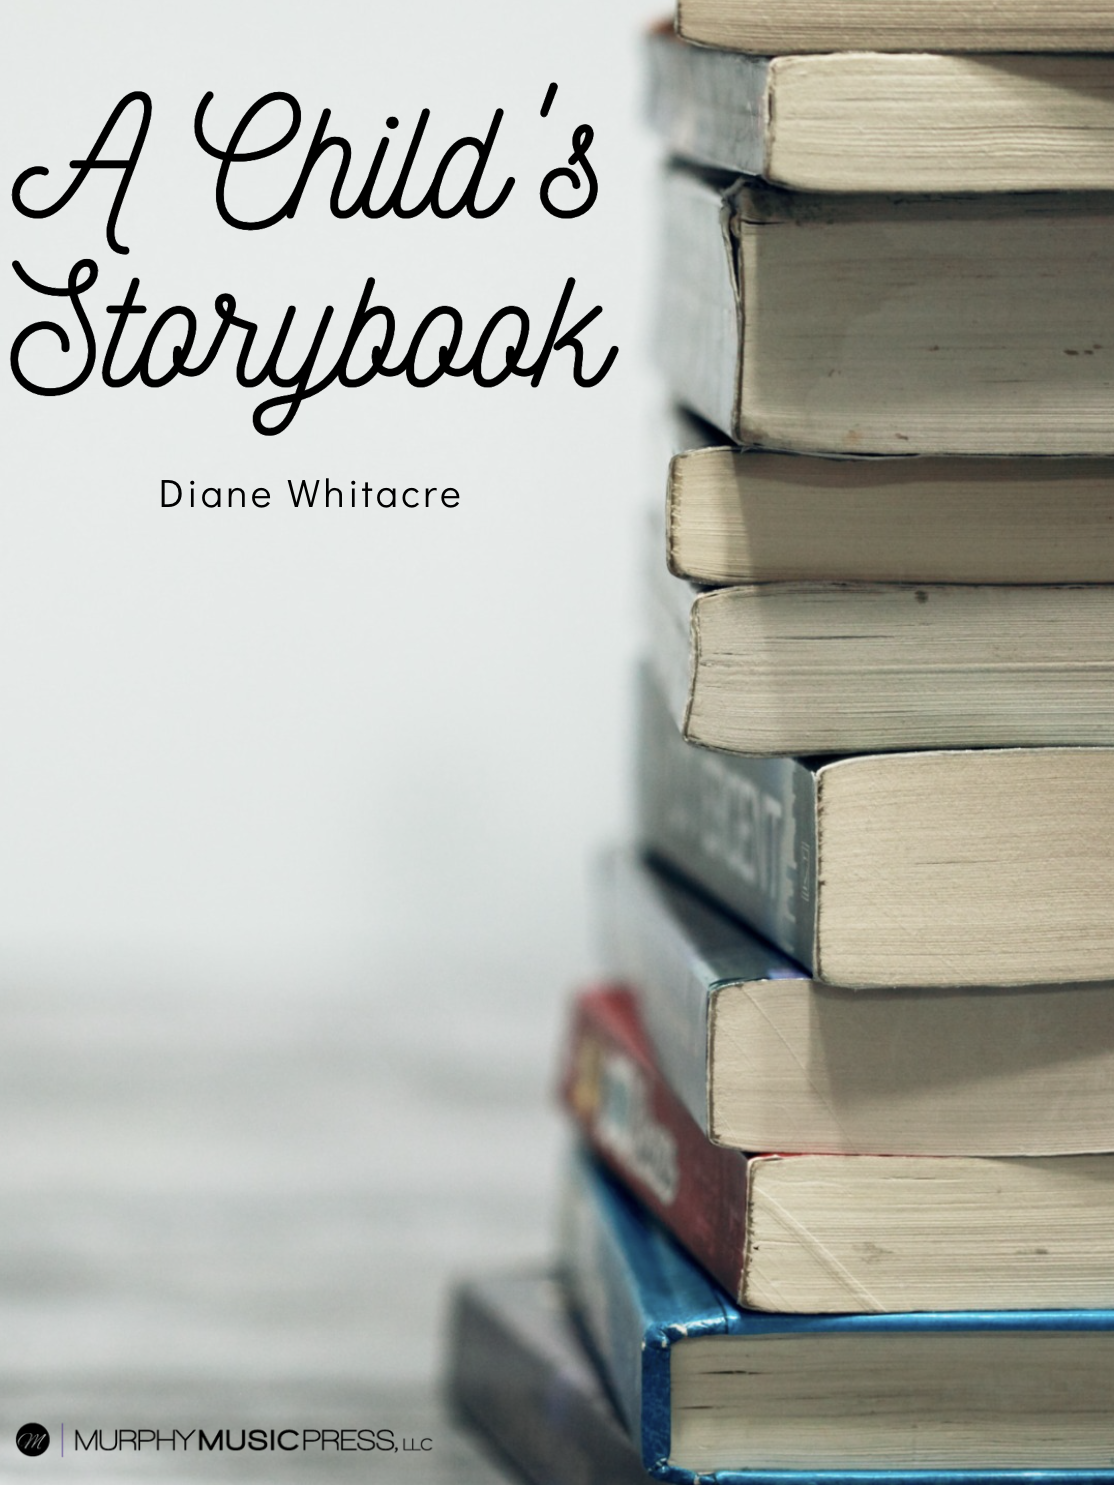 A Child's Storybook by Diane Whitacre